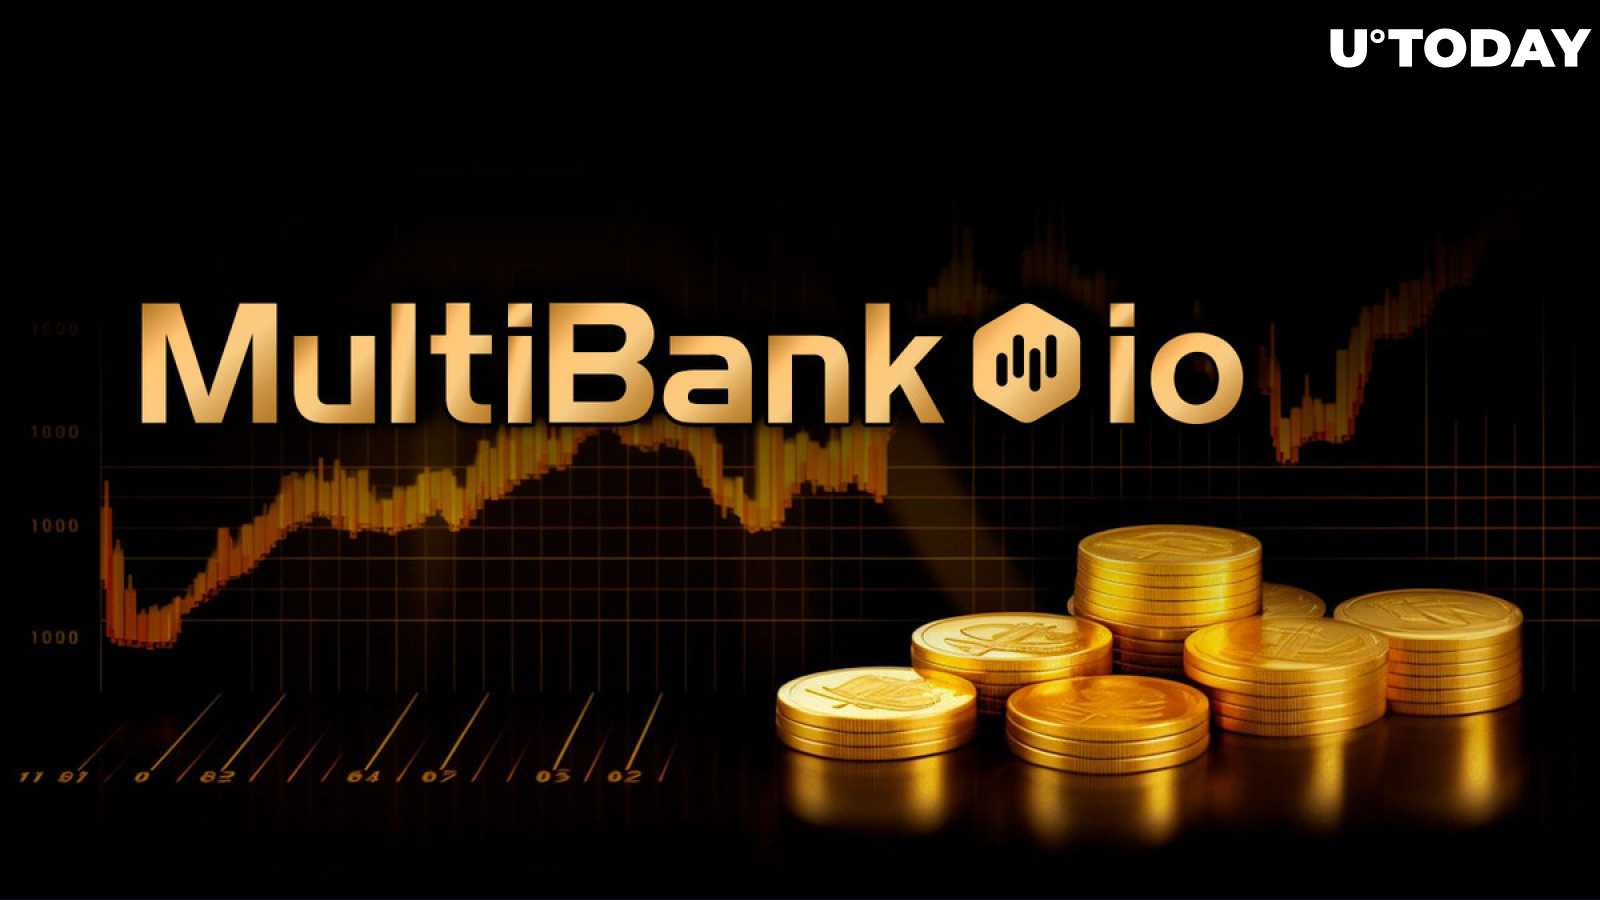 MultiBank.io Releases 'Panic Sell' Feature for All Traders: Details